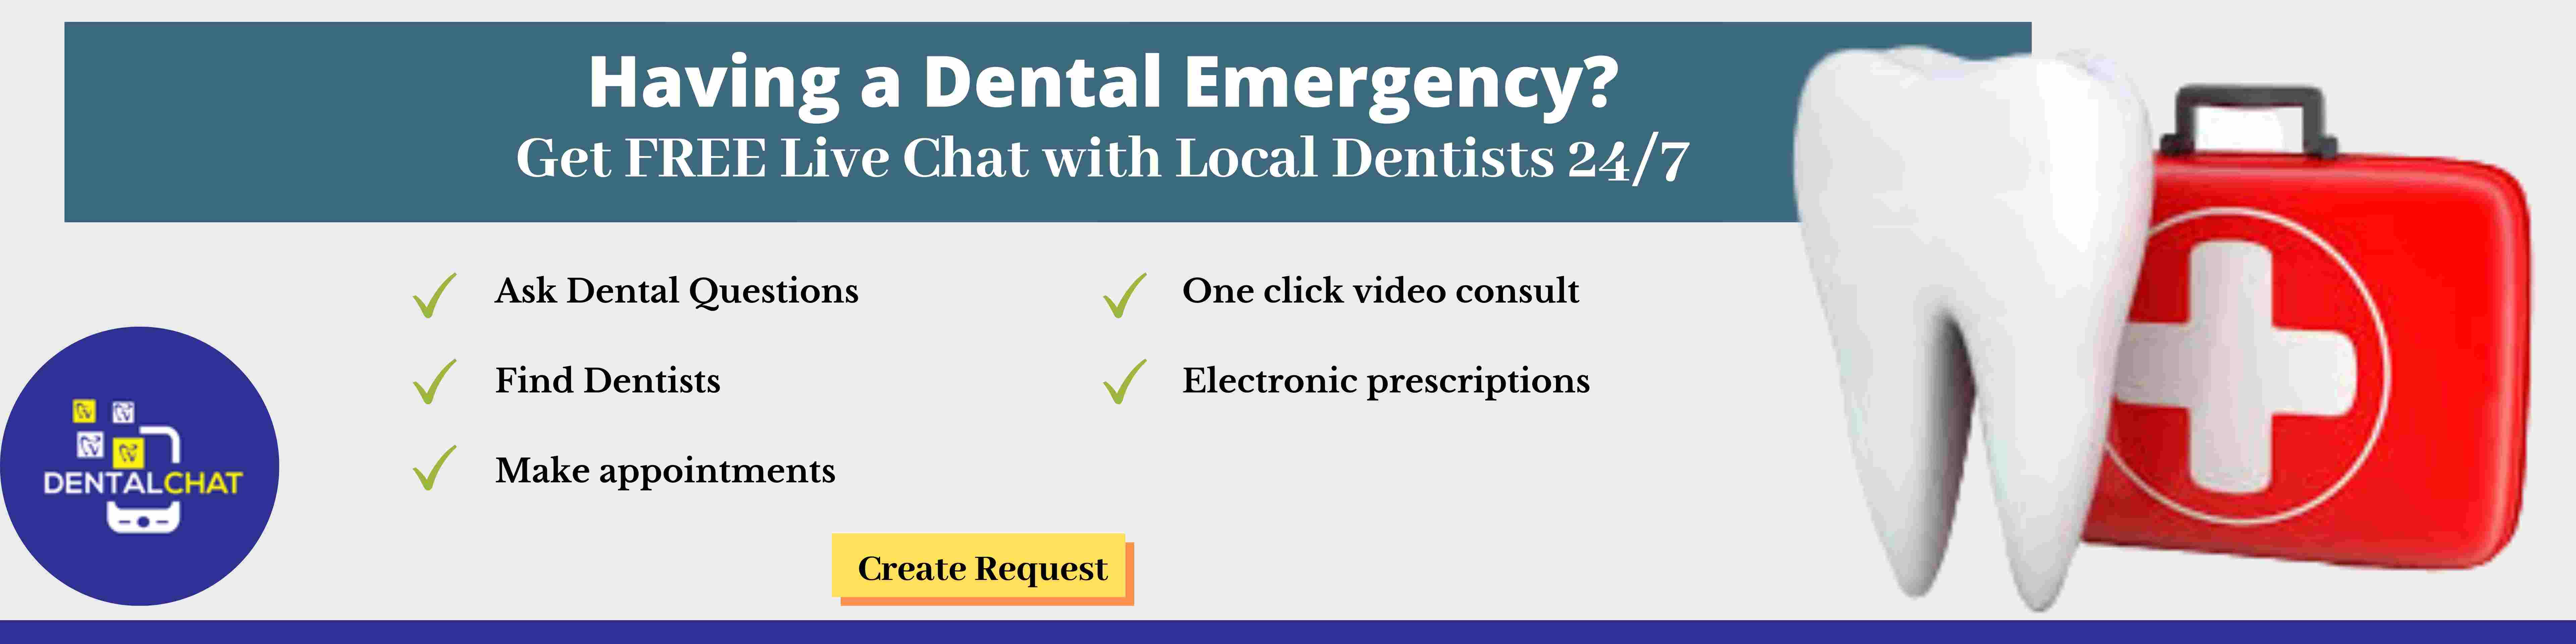 Emergency dentist questions, local dental question blog online, breaking a tooth chat